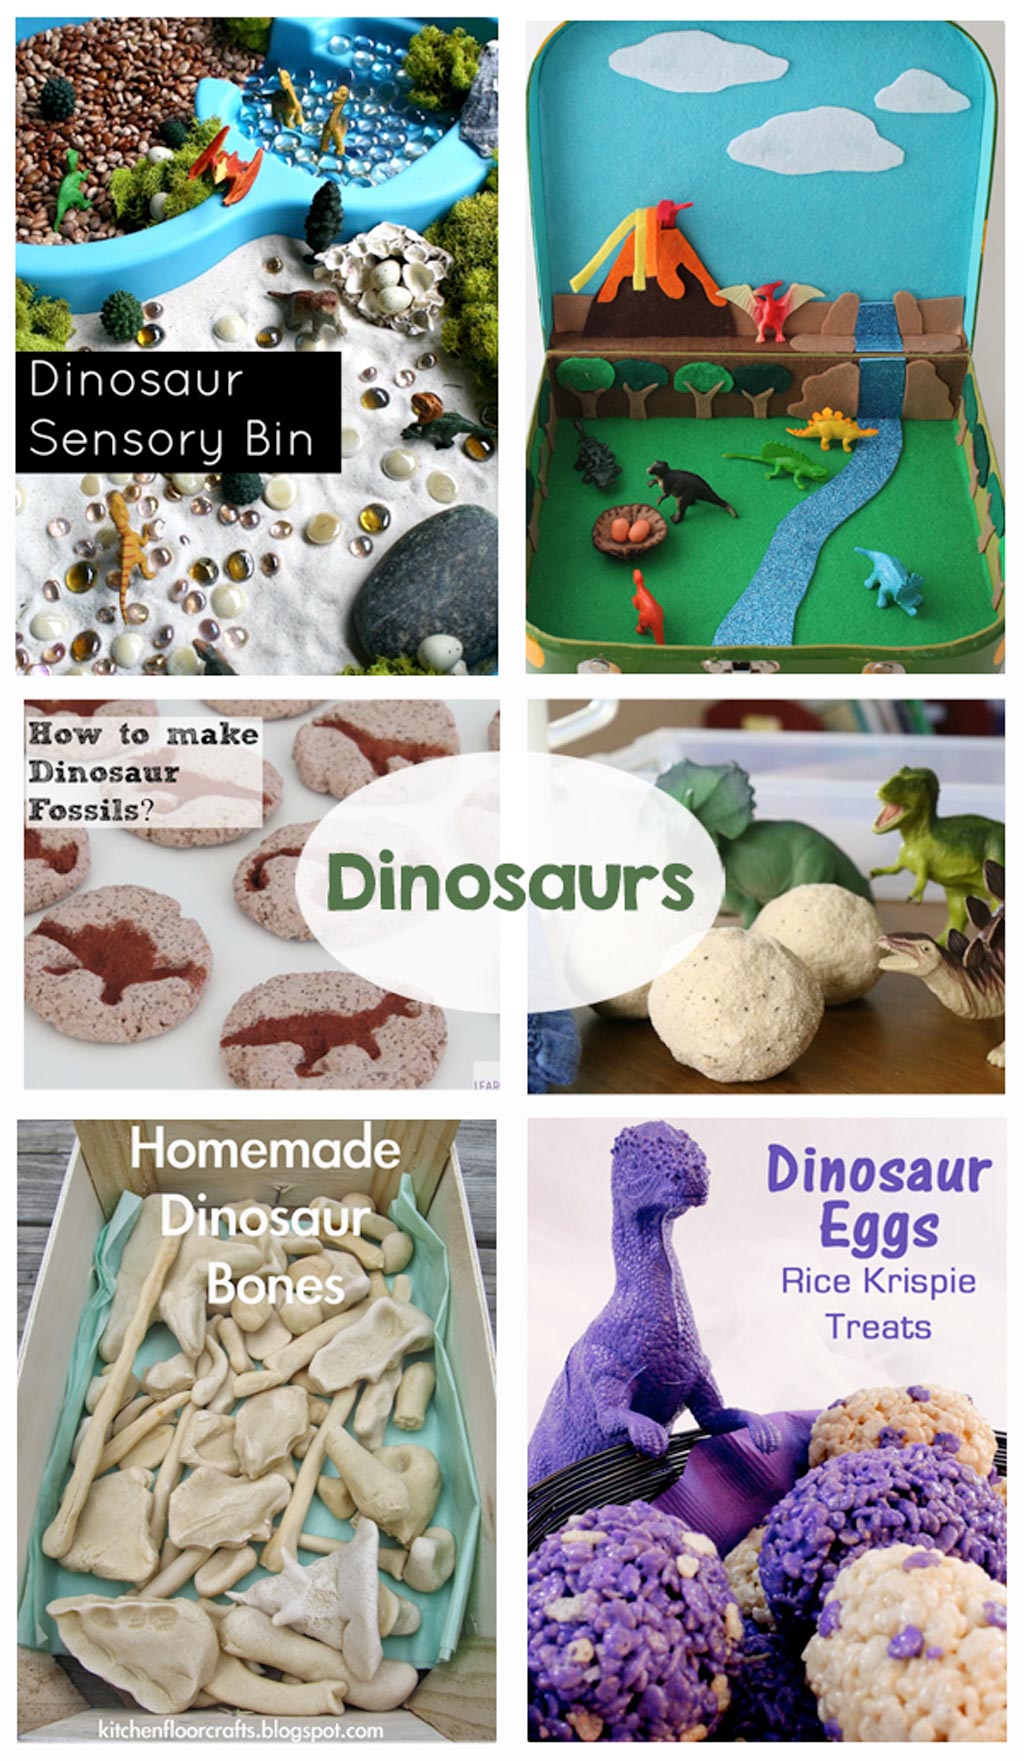 Dinosaurs - Crafts, games, printables, kids activities, treats... everything you need for a dinosaur party or adventure!